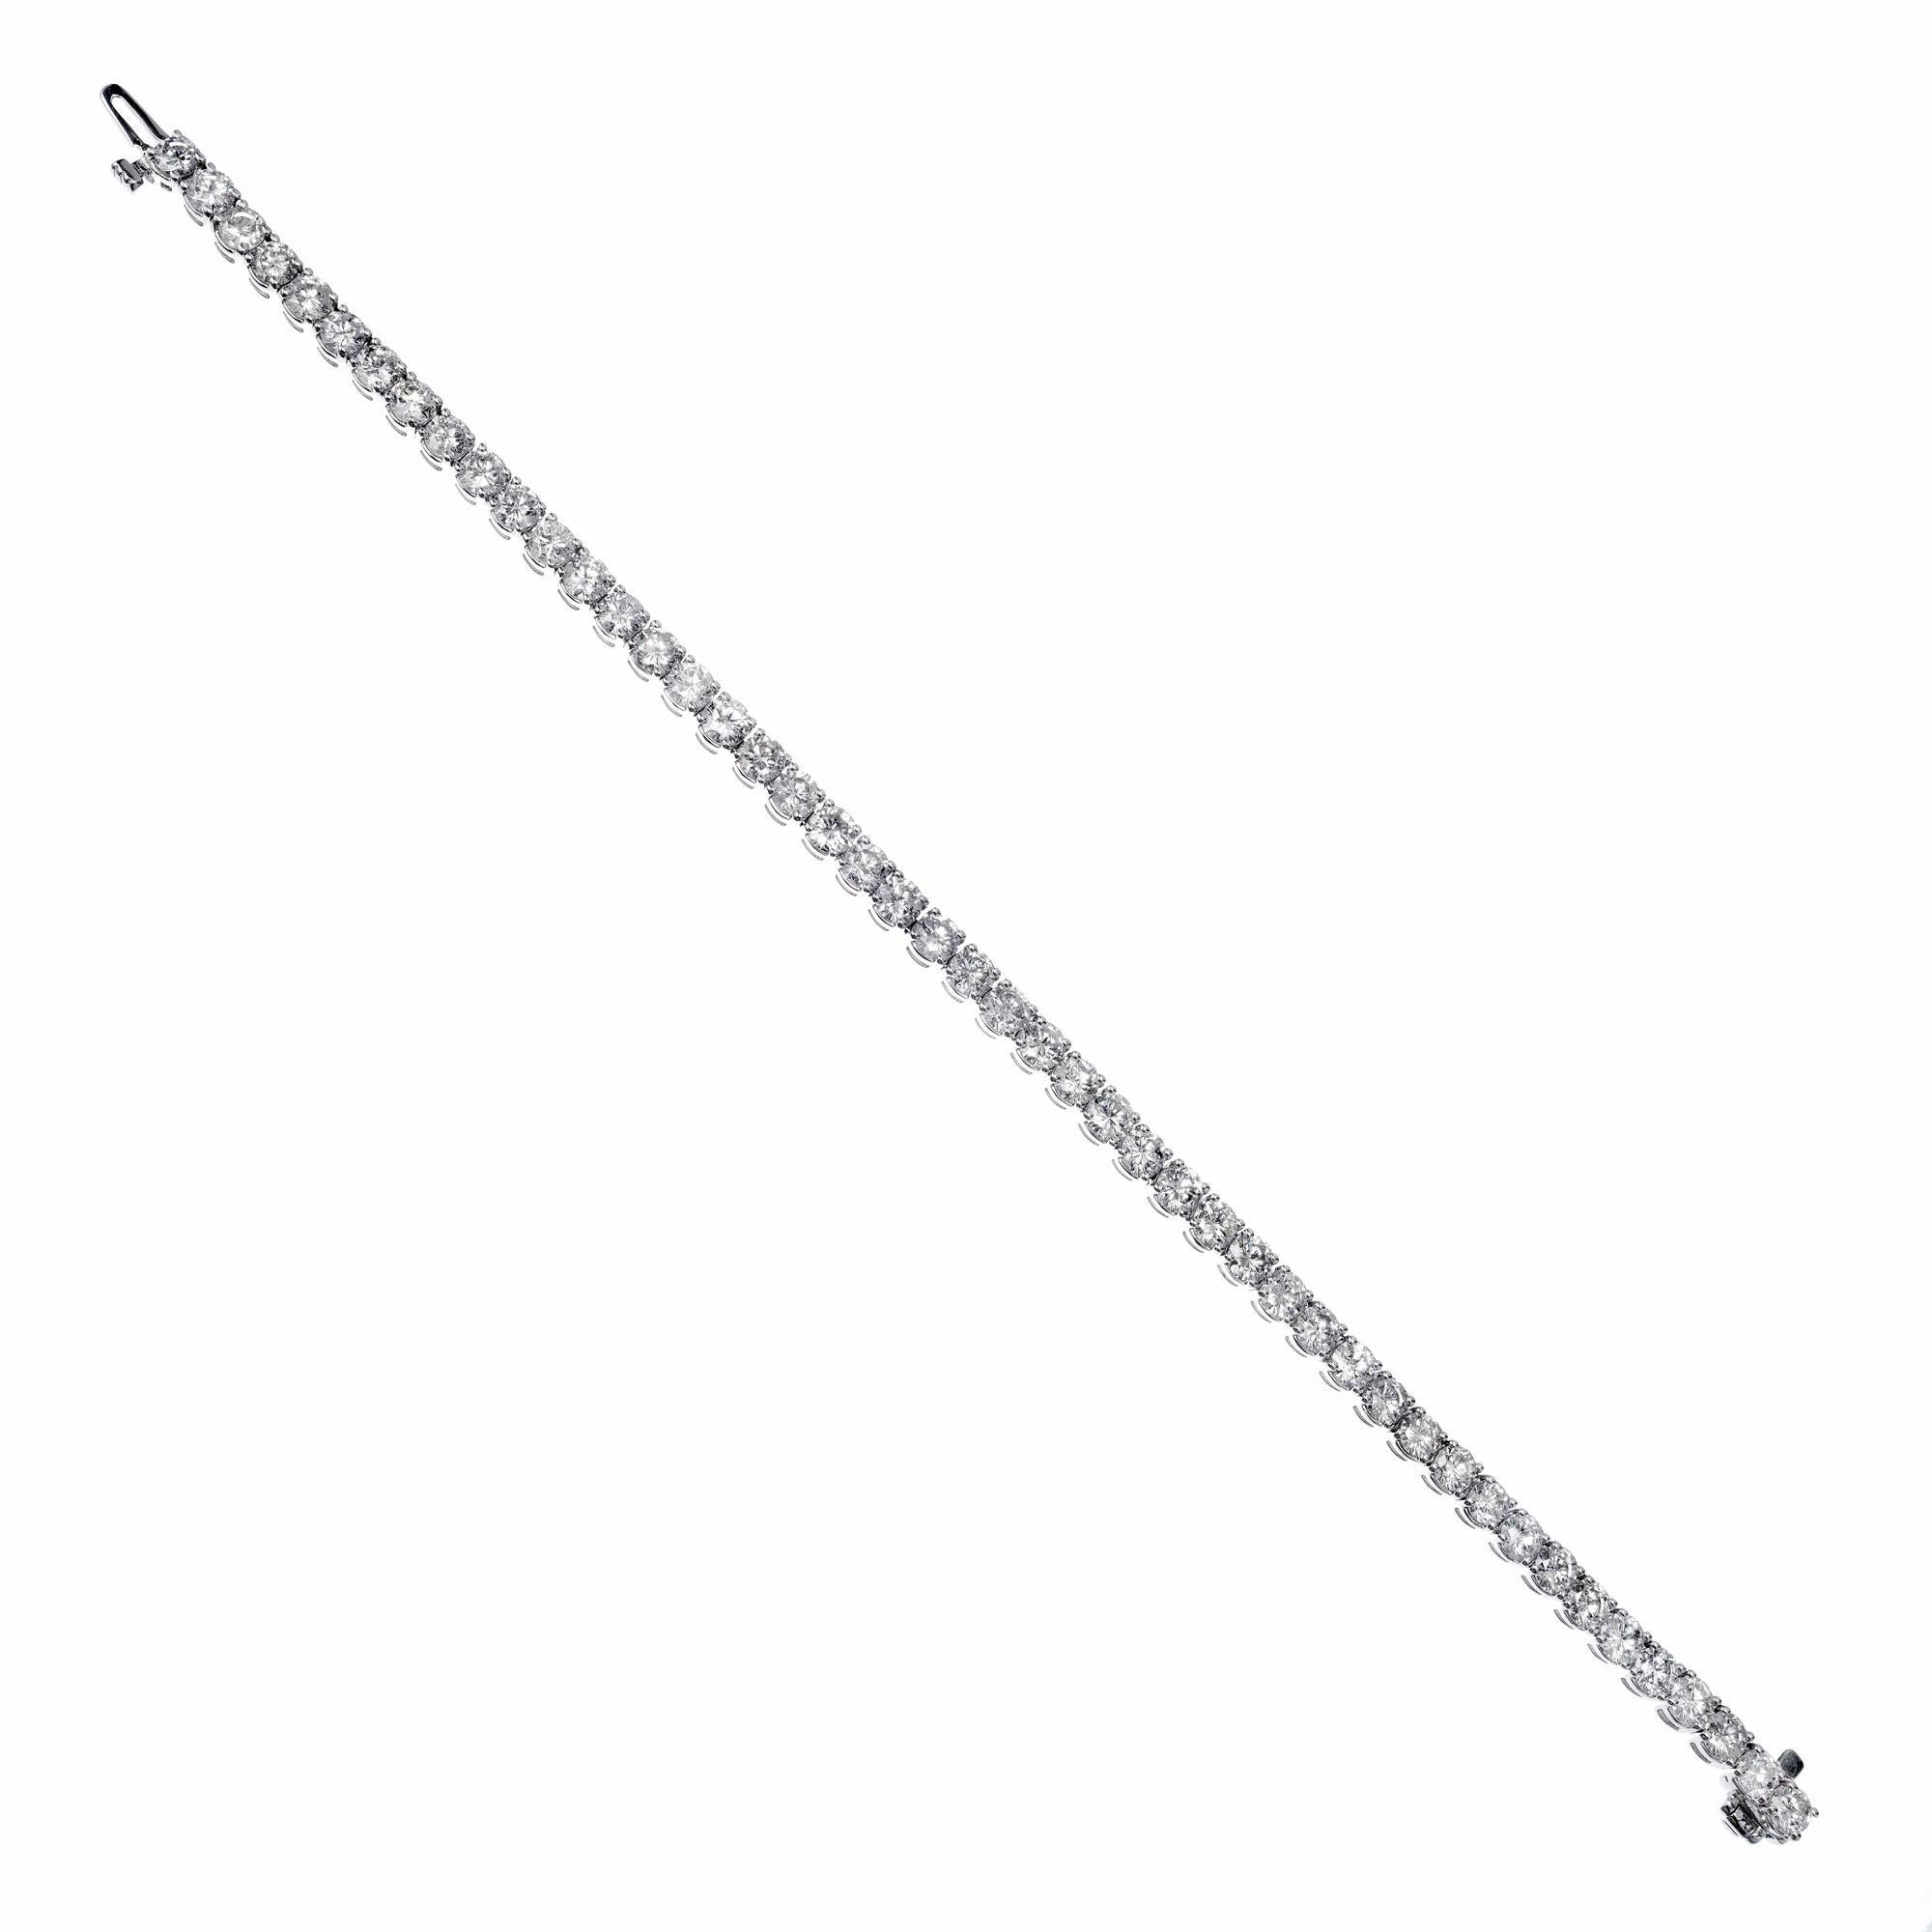 Bright round diamond 14k white gold tennis bracelet from the Peter Suchy Workshop.

48 round brilliant cut diamonds F-G SI-I, approx.  7.73cts
14k white gold 
Stamped: 14k
13.8 grams
Bracelet: 7 Inches
Width: 3.95mm 
Thickness/depth: 3.8mm

